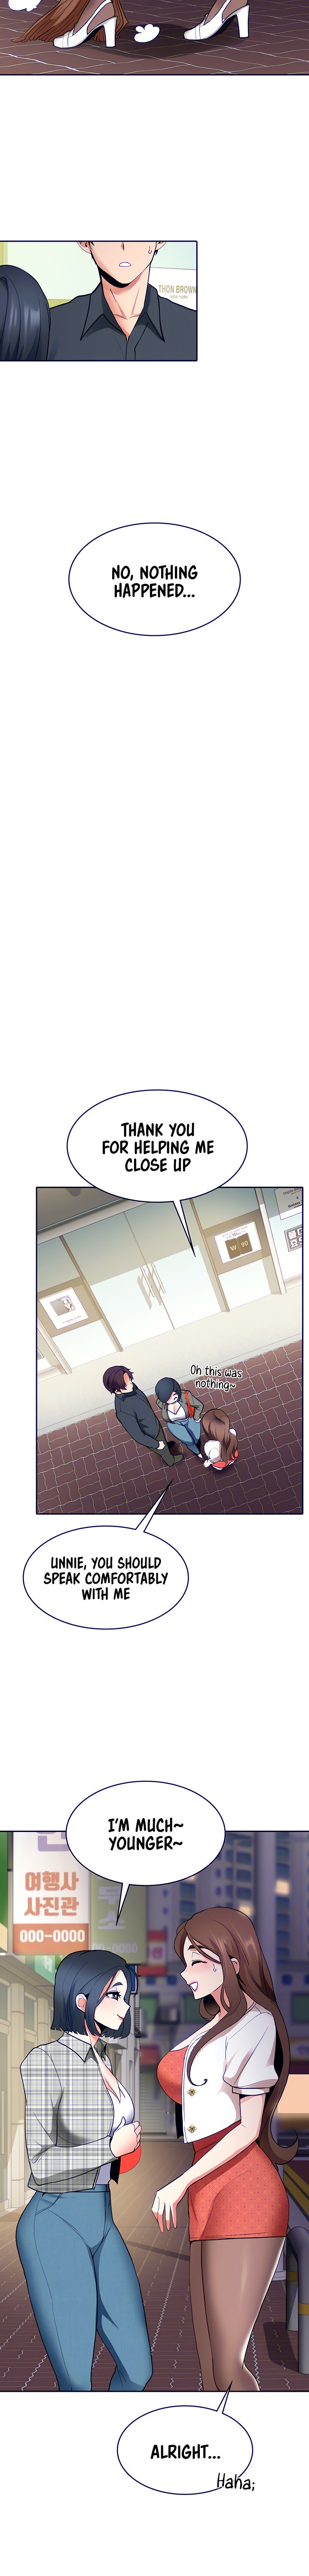 Need A Service? - Chapter 10 Page 6